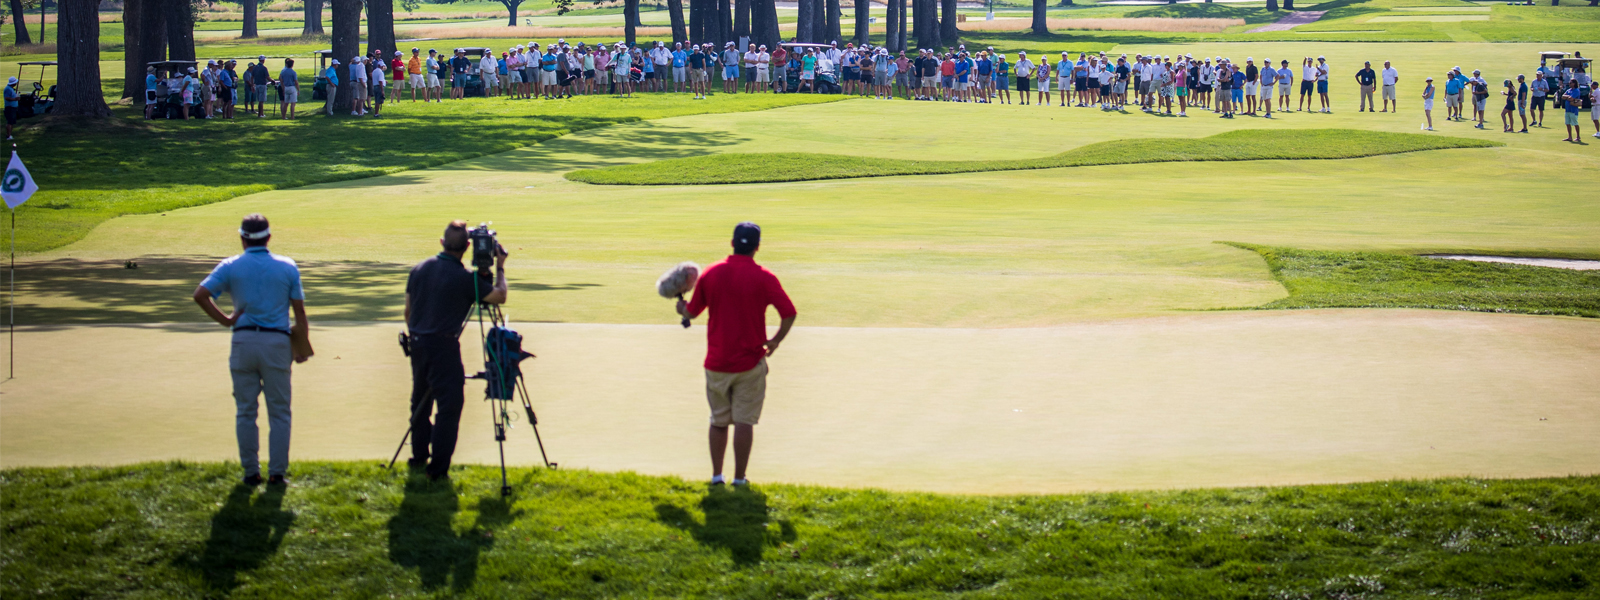 WGA to provide streaming coverage of Western Amateur